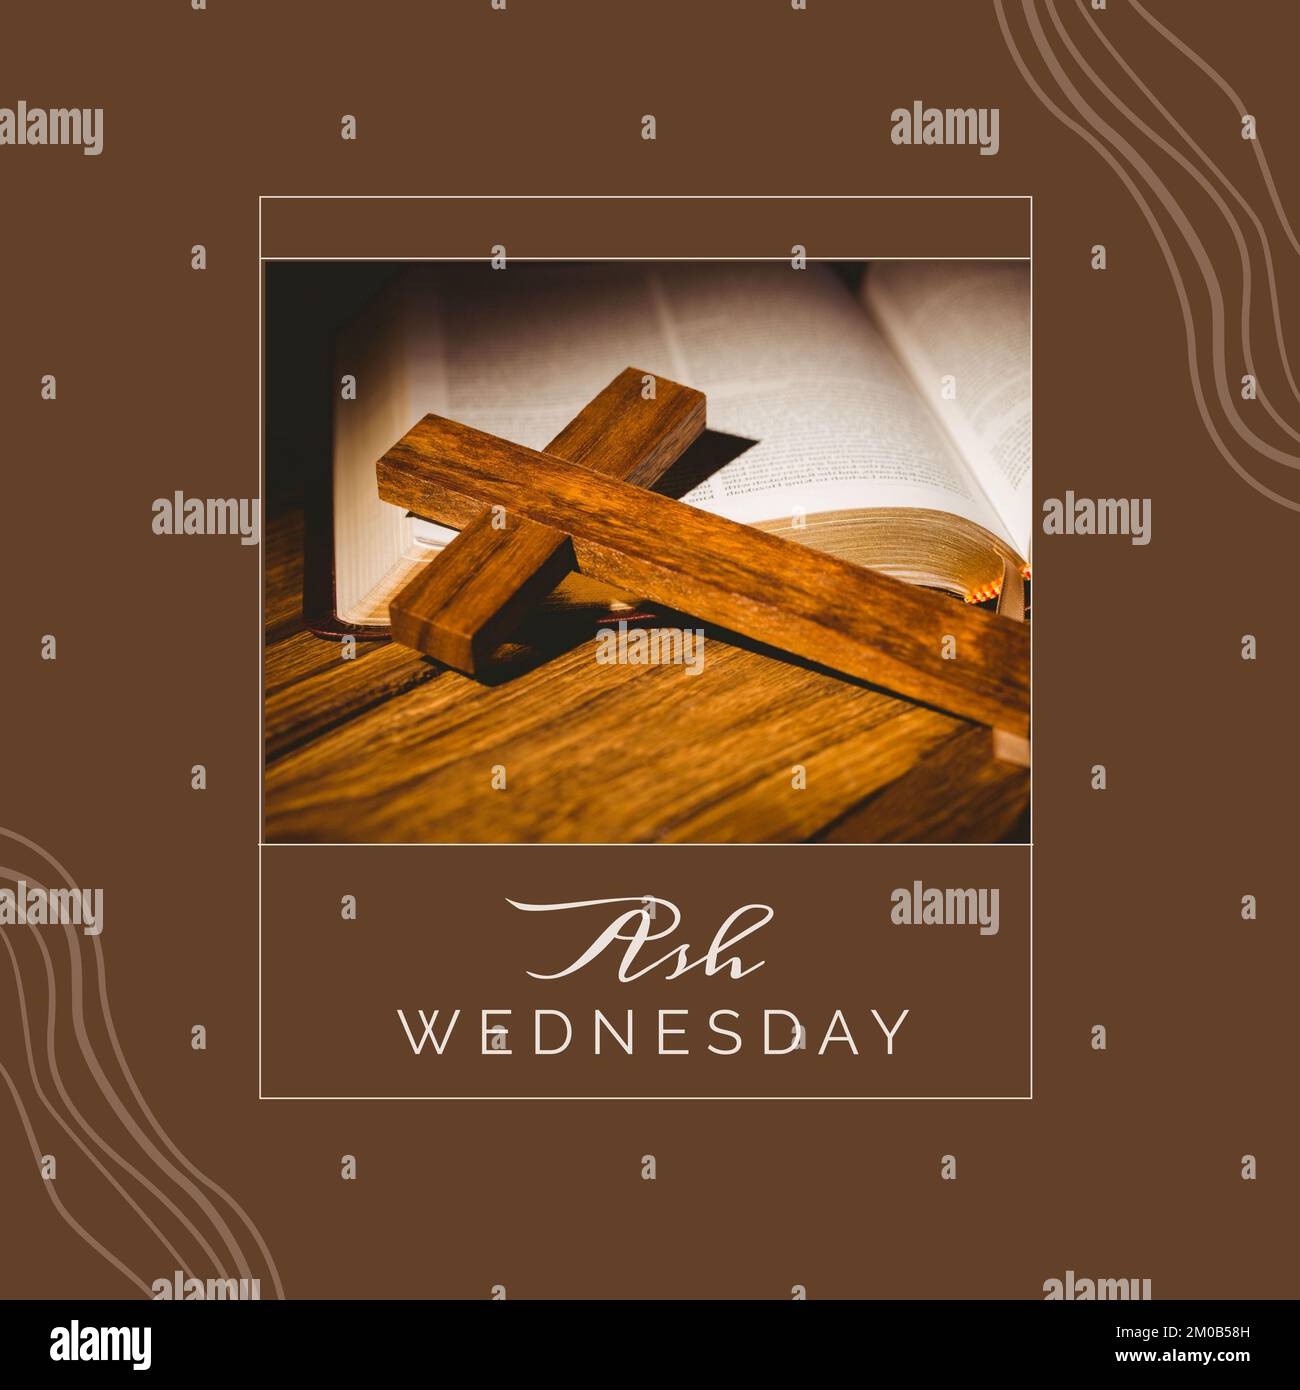 Image of ash wednesday over brown background with cross Stock Photo